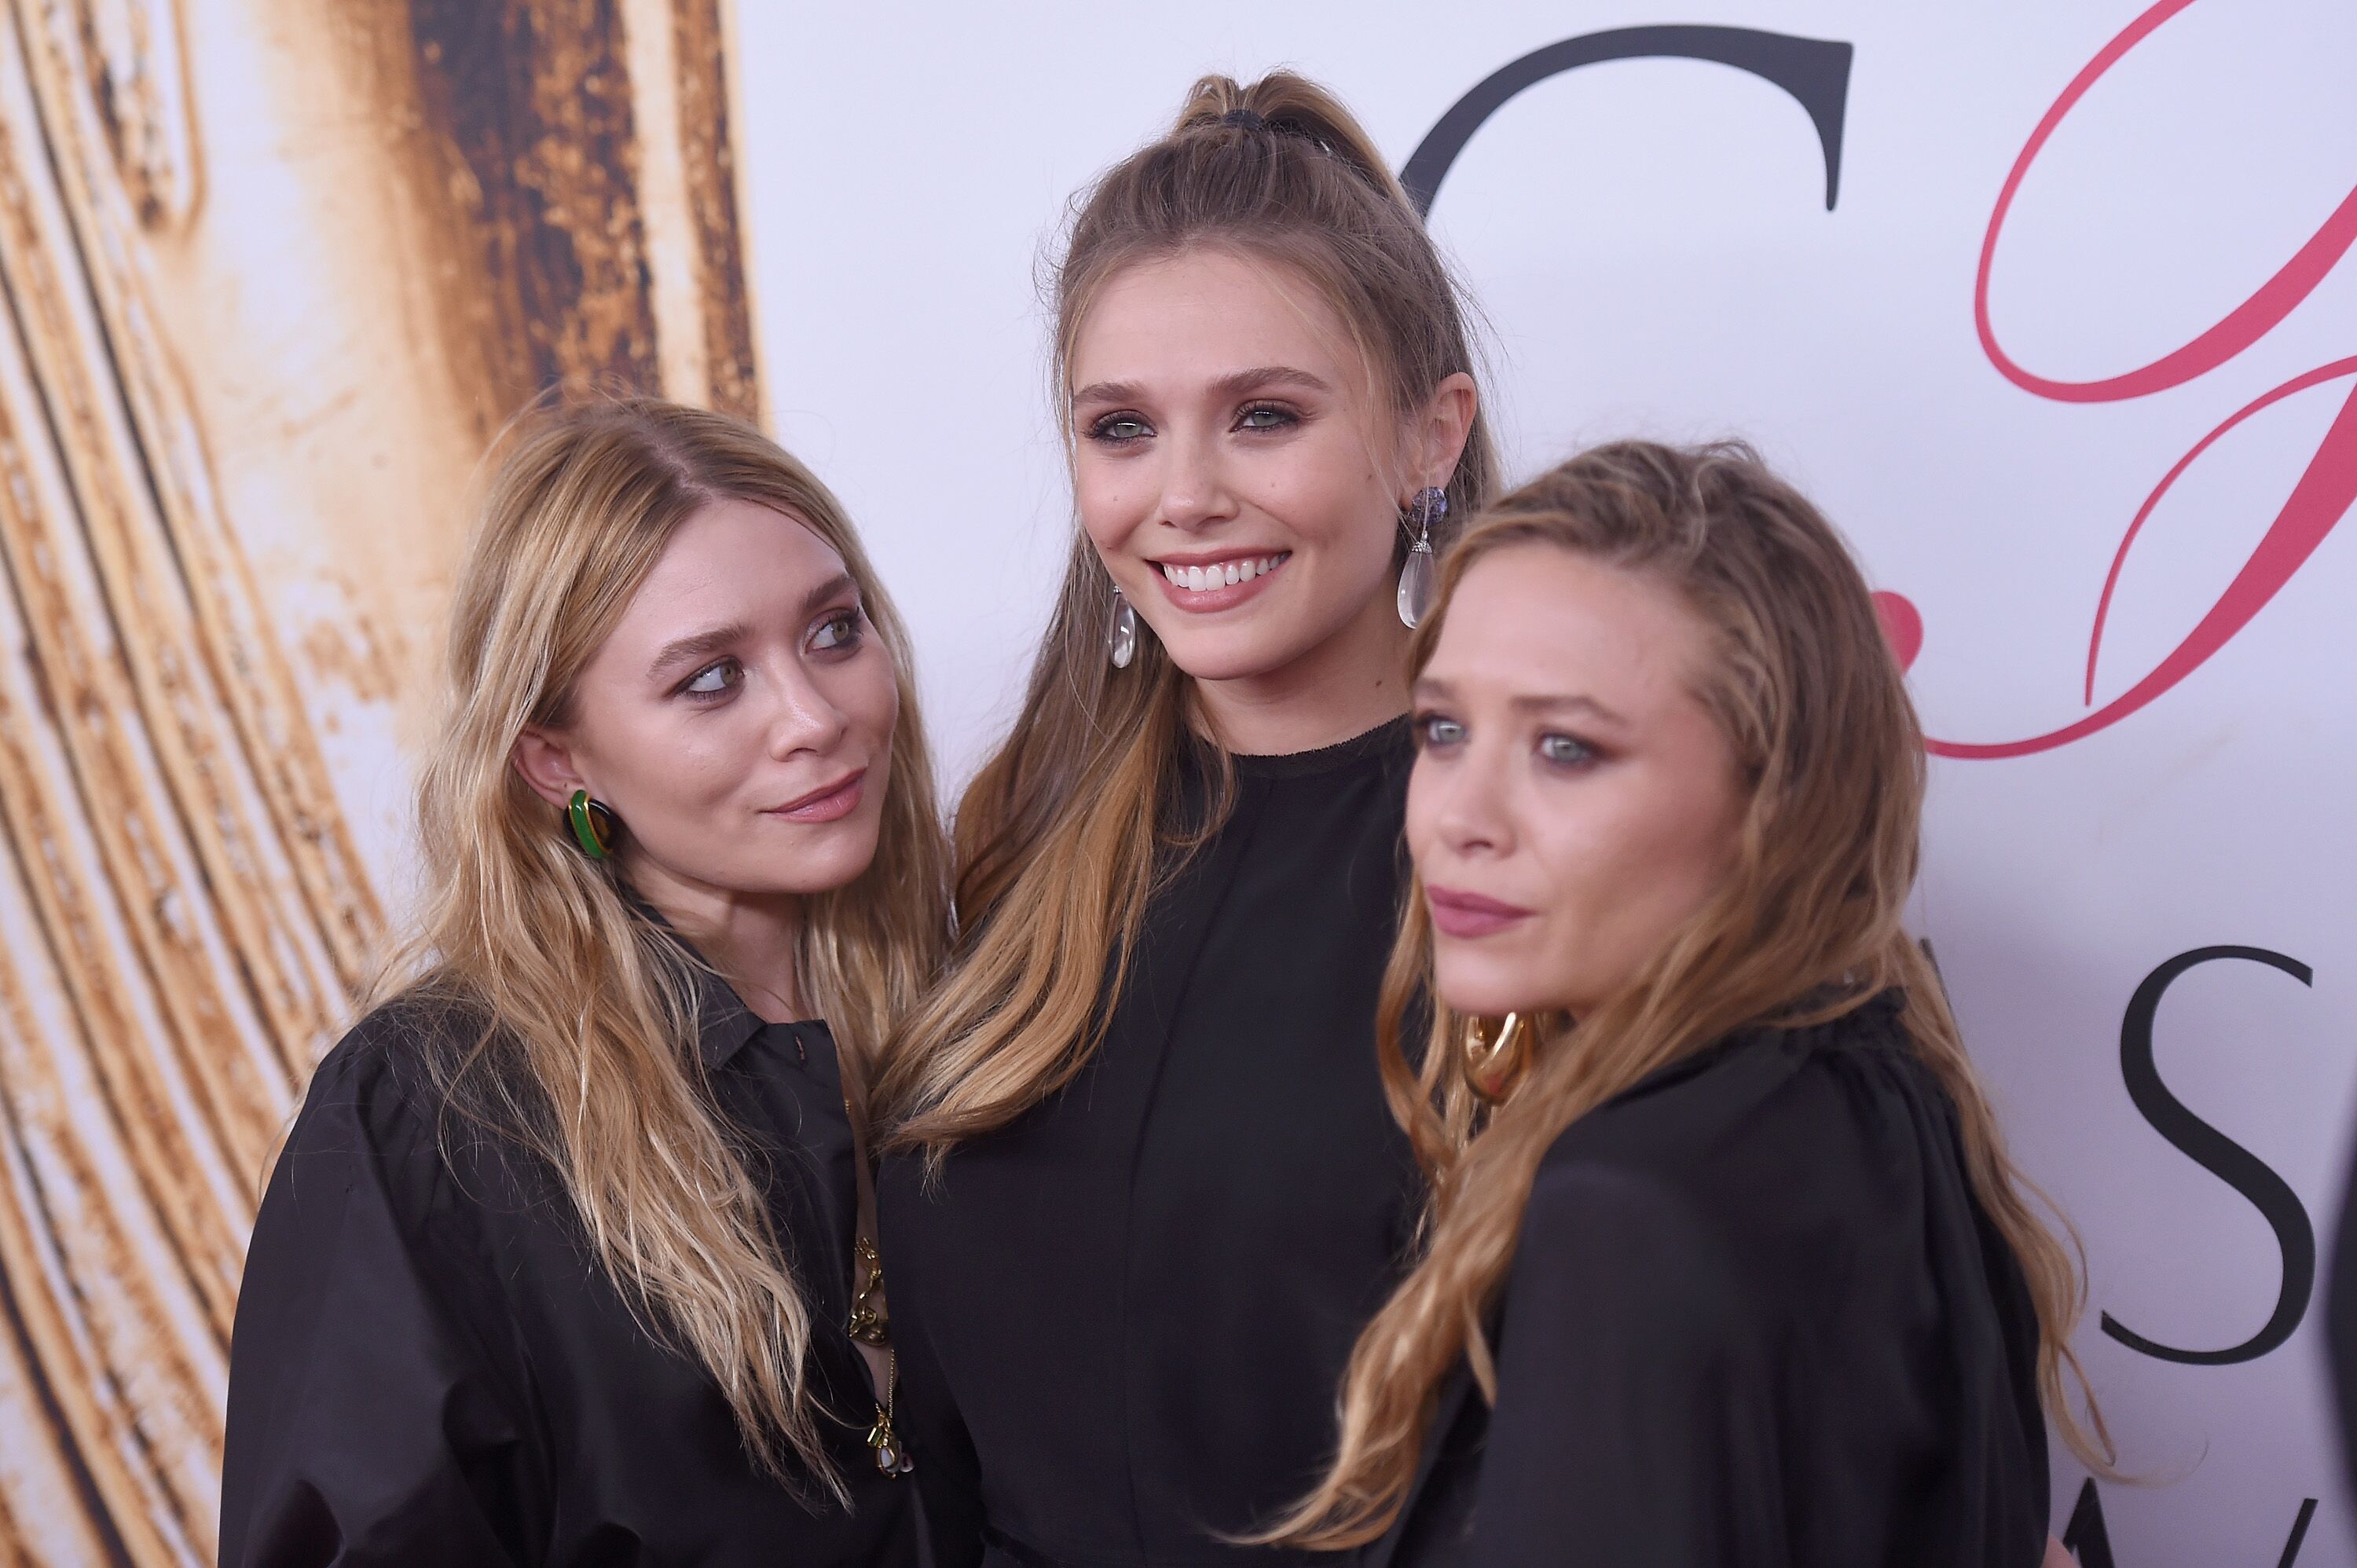 Elizabeth, Mary-Kate and Ashley Olsen at the 2016 CFDA Fashion Awards in New York | Source: Getty Images